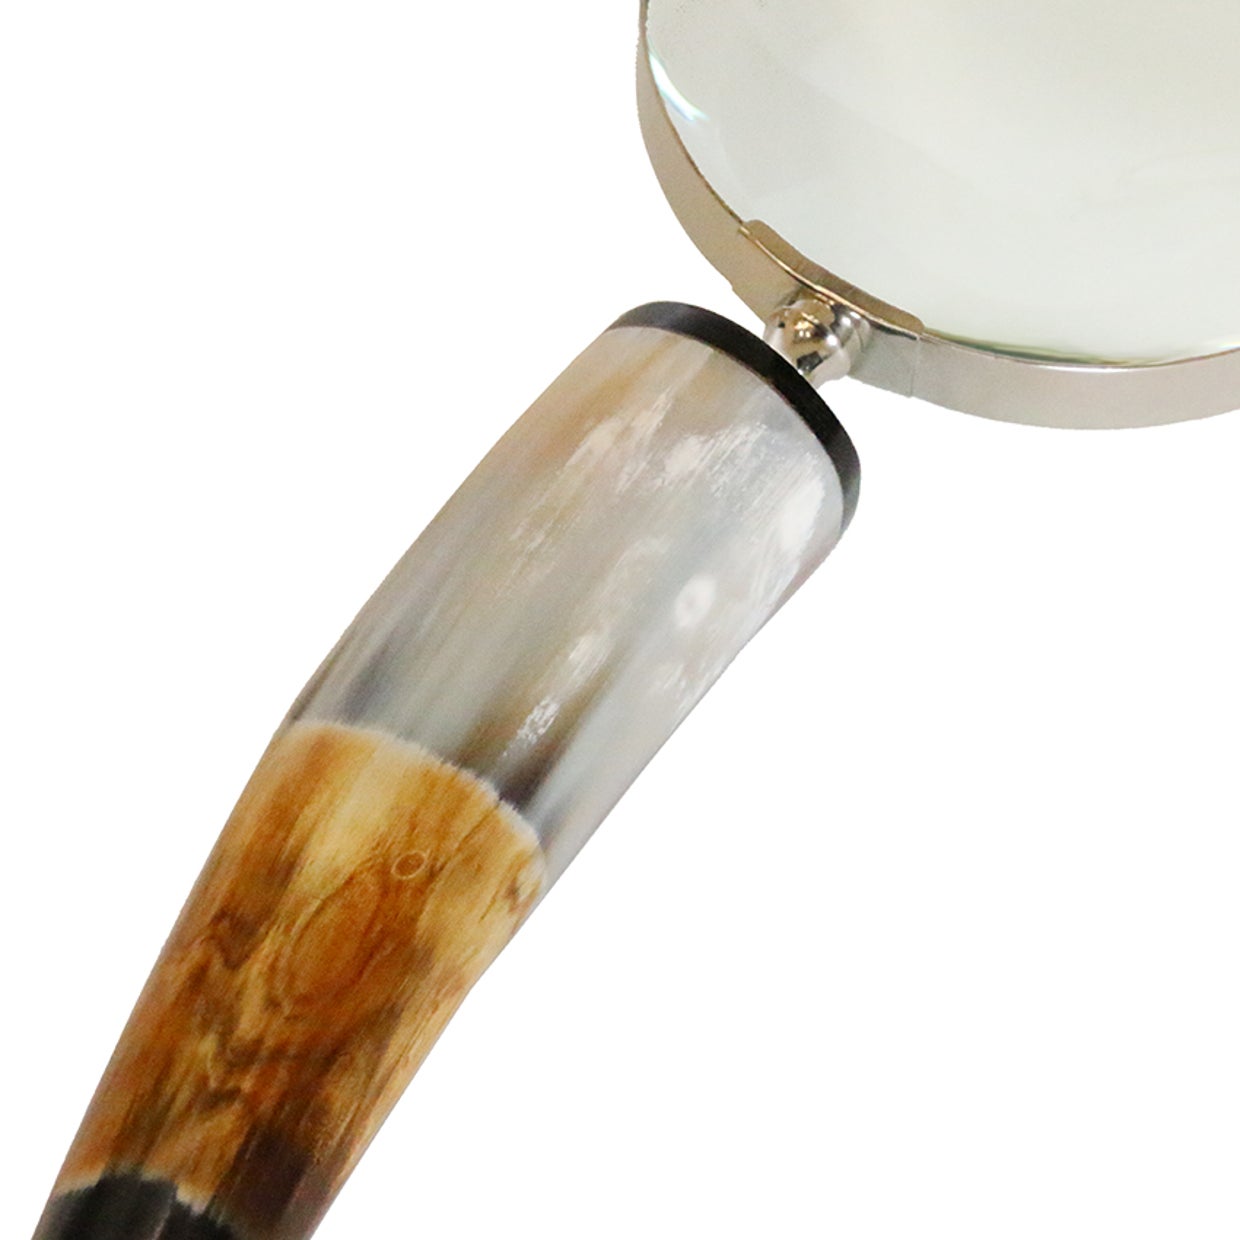 Brass Magnifying Glass with Curved Horn Handle